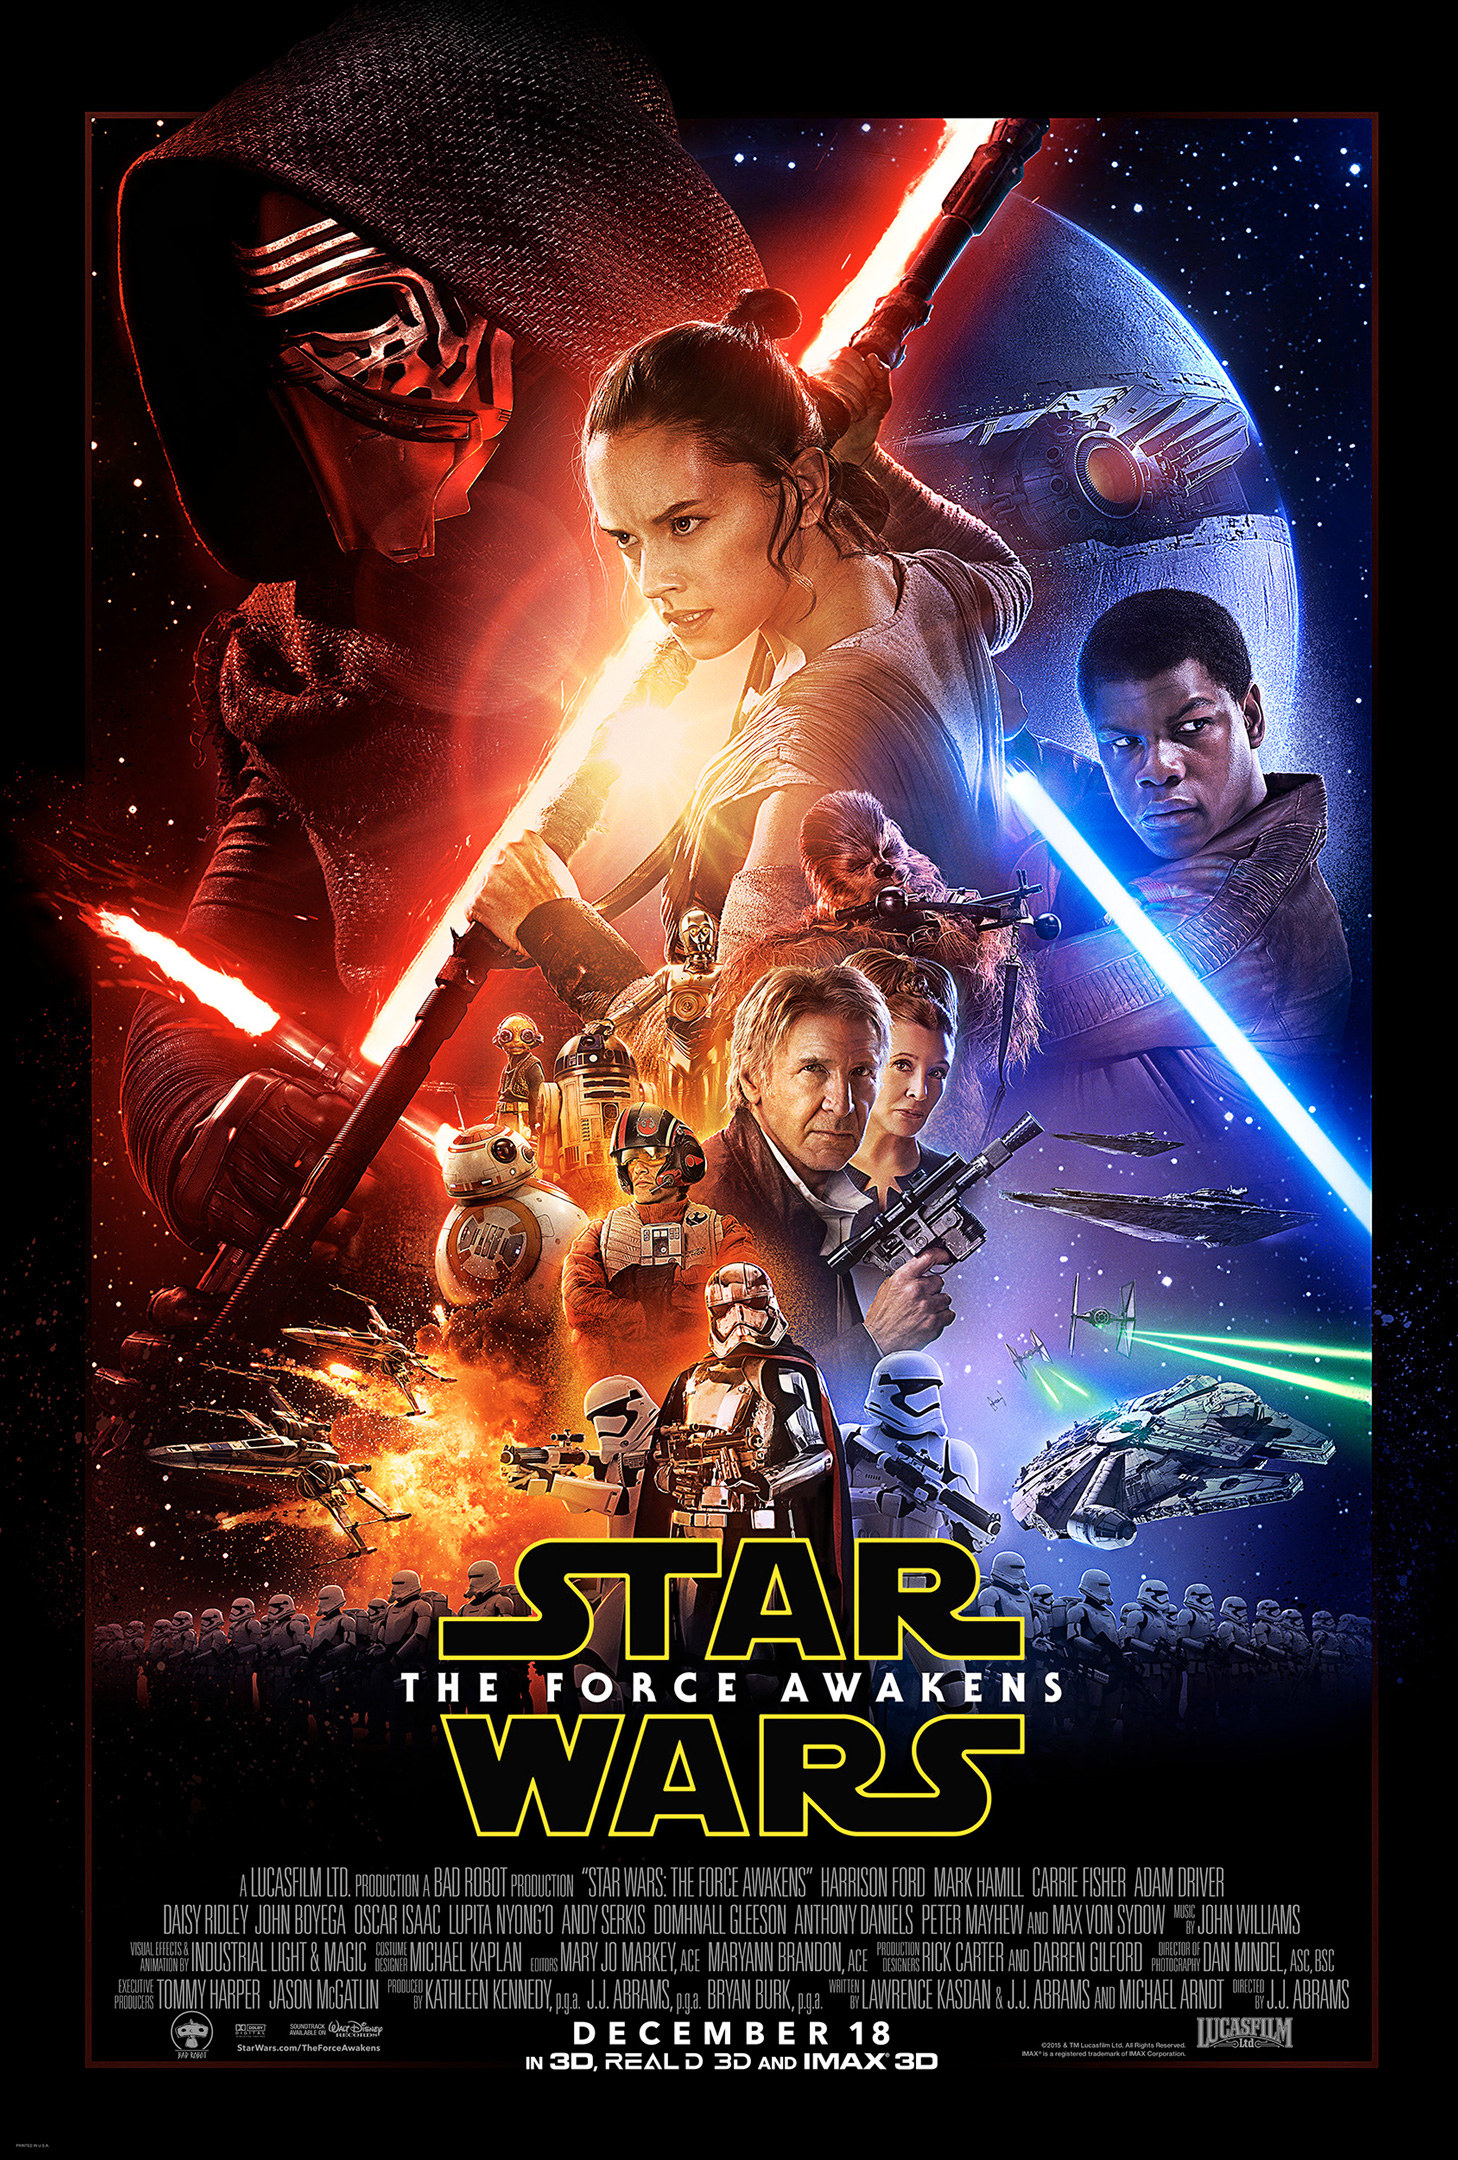 Star Wars Episode VII: The Force Awakens Theatrical Poster